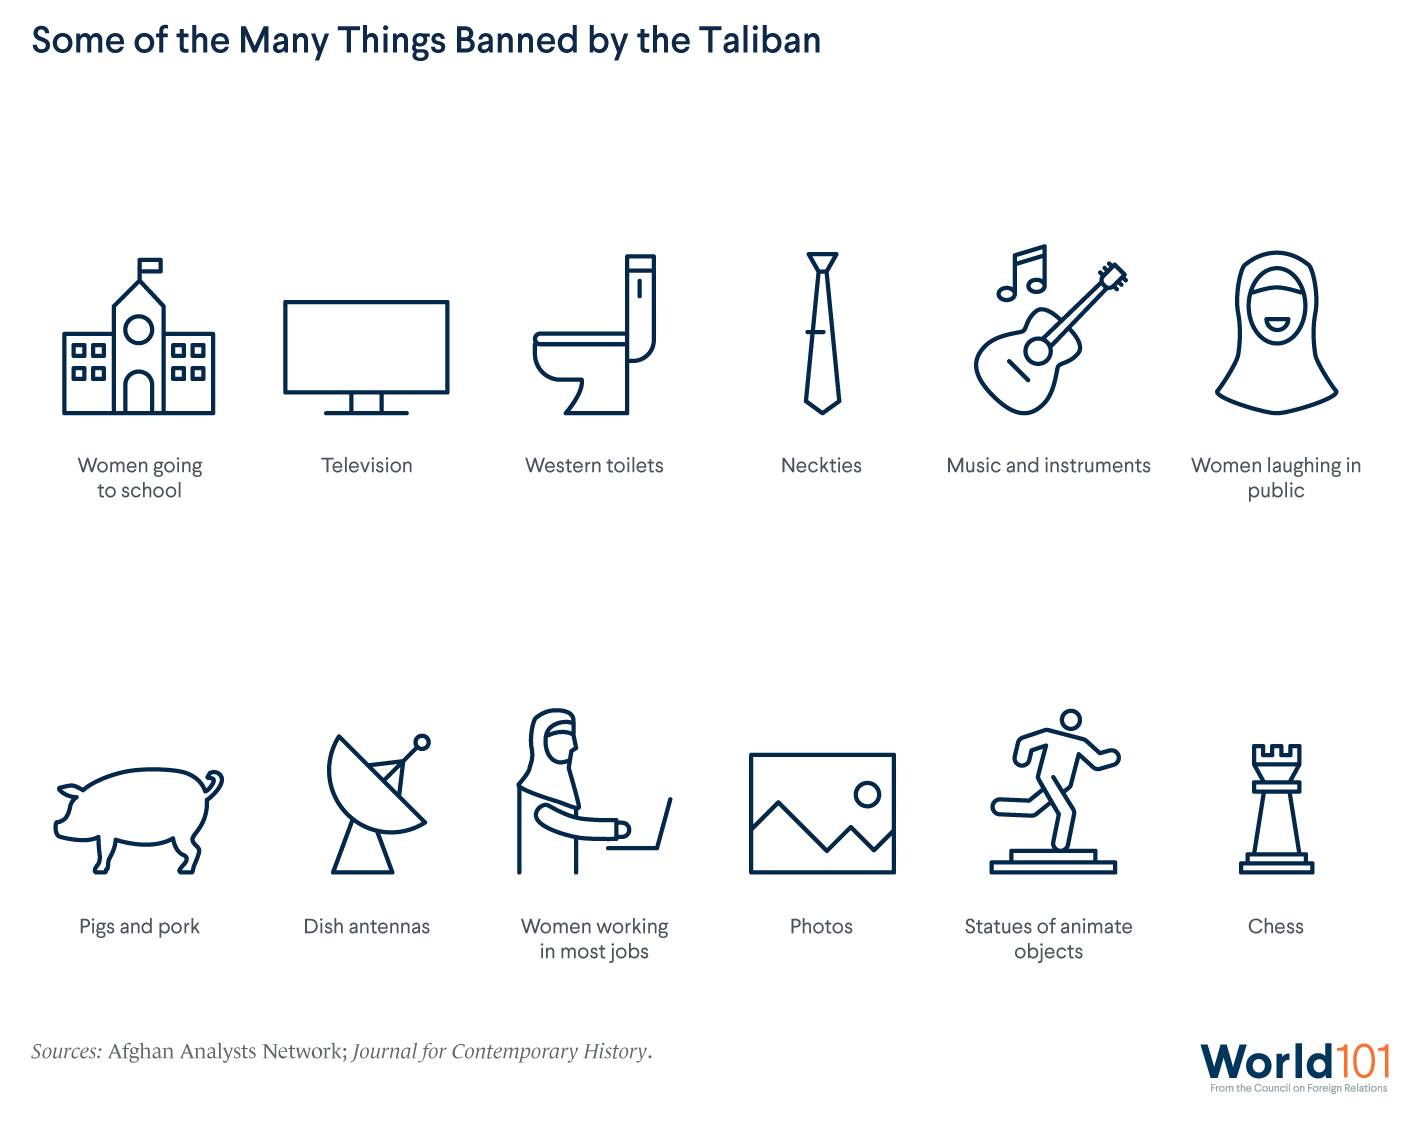 Infographic of some of the things banned by the Taliban. Its Ministry of Virtue and Vice banned television and musical instruments and outlawed education for women. For more info contact us at world101@cfr.org.